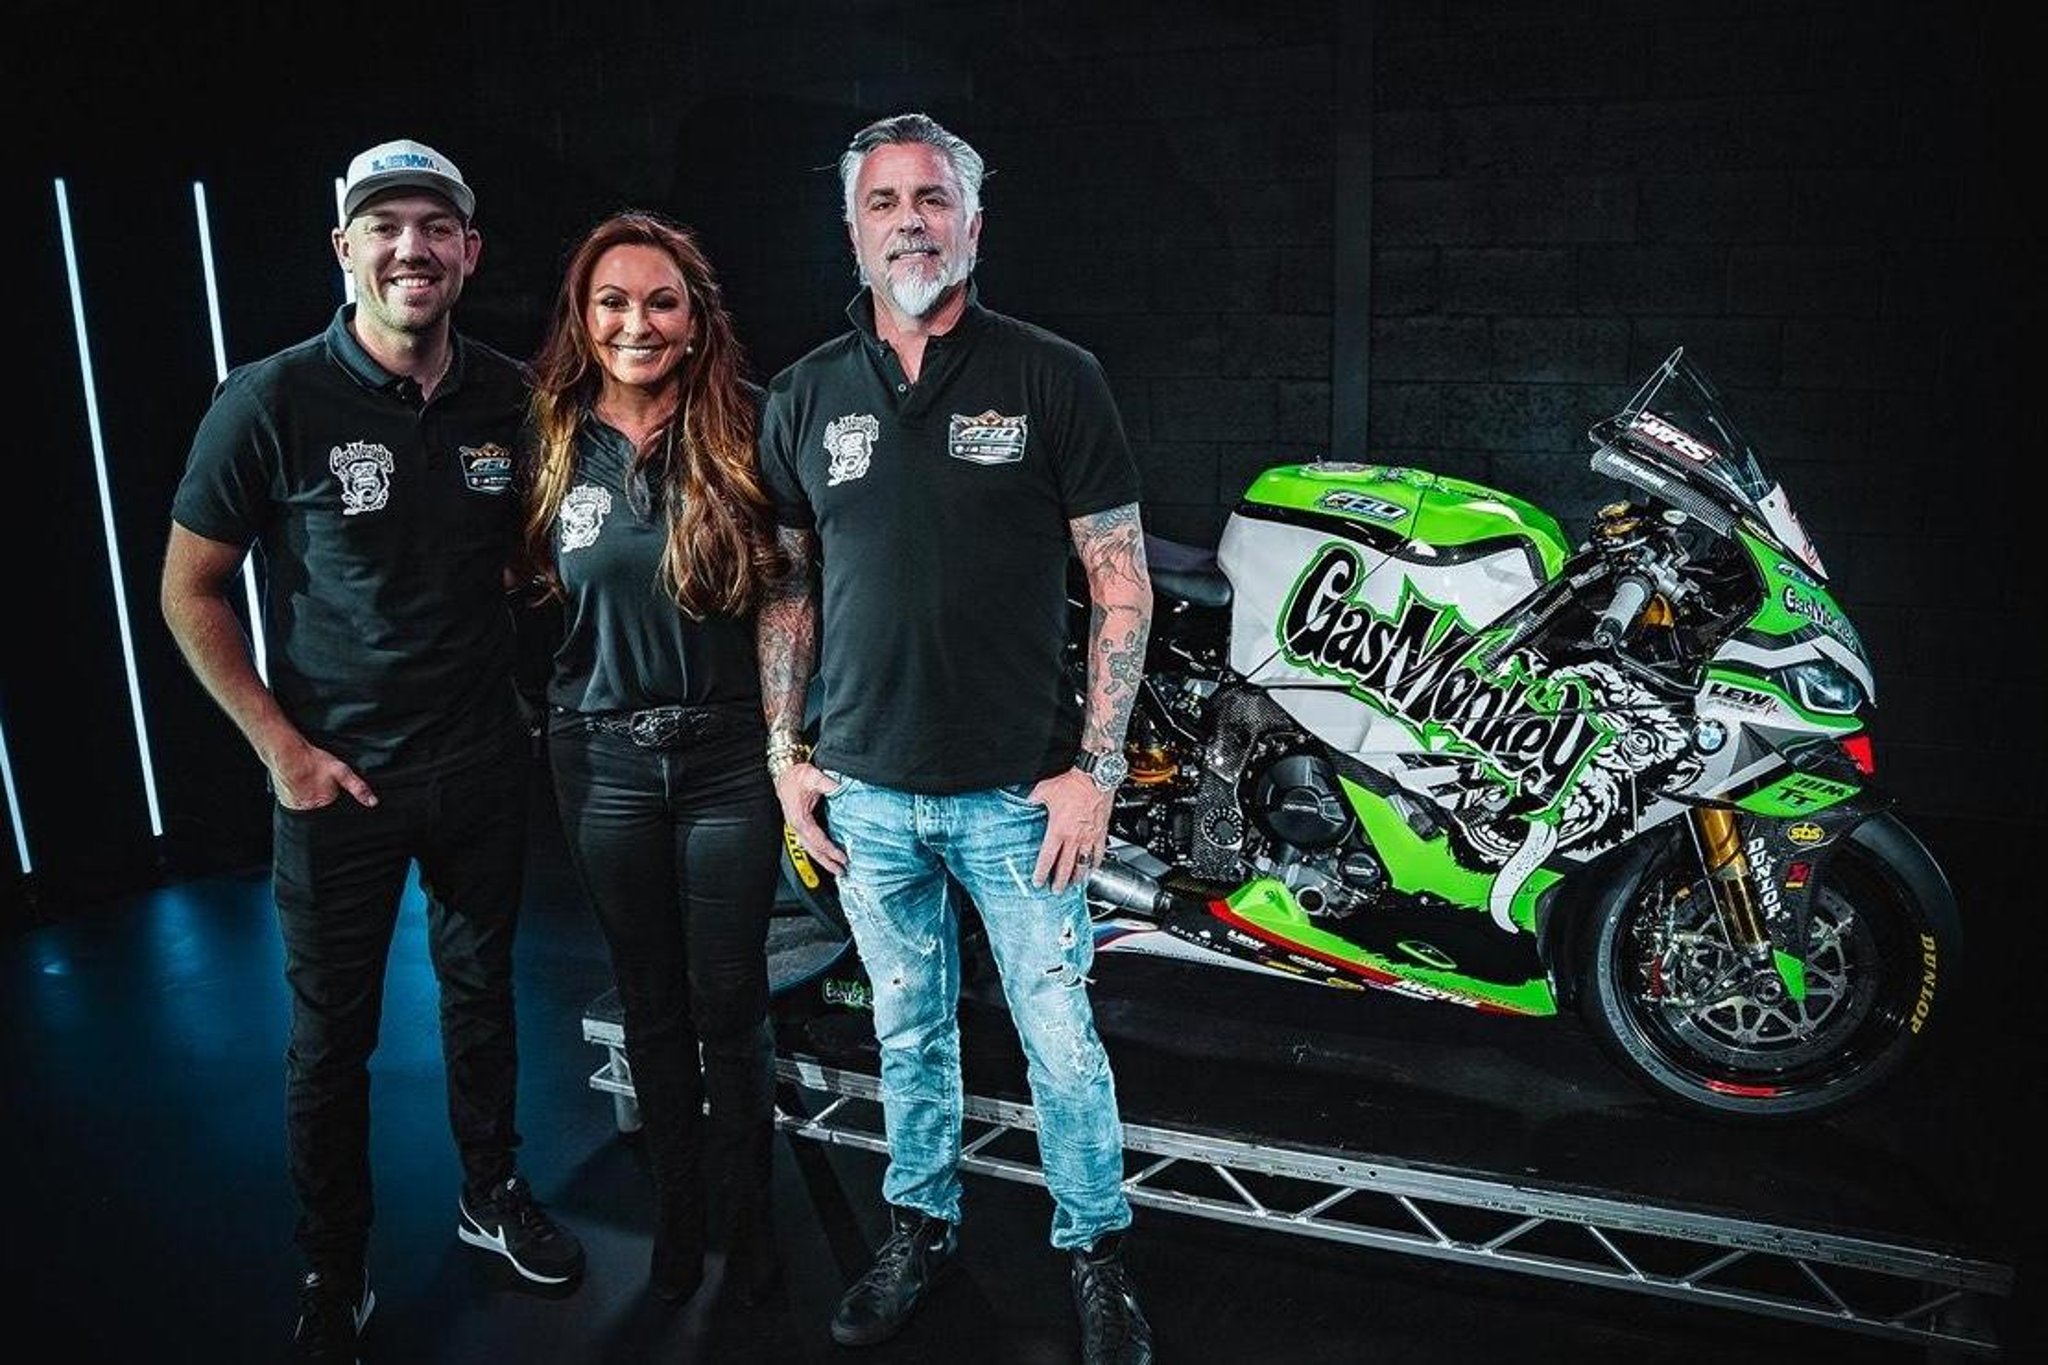 FHO Racing's Peter Hickman unveils Gas Monkey Garage BMW he will race at Isle of Man TT